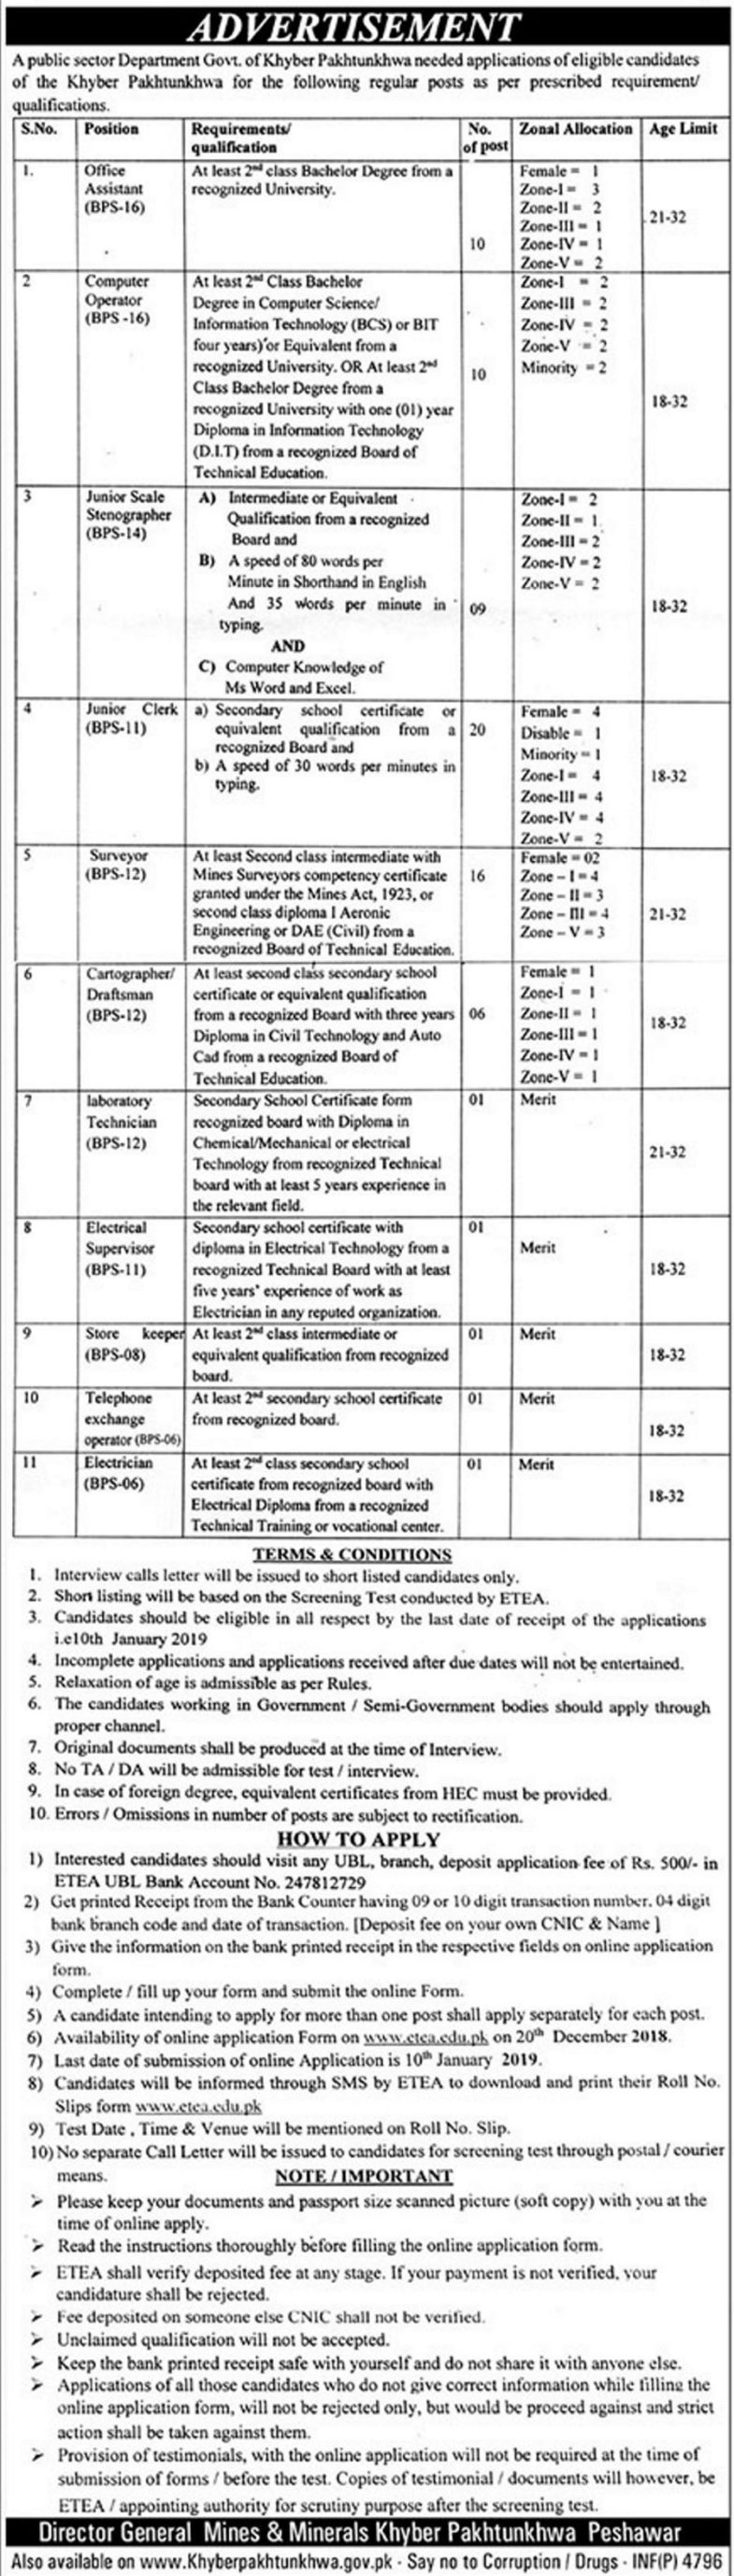 KP Public Sector Organization Jobs 2019 for 76+ Clerks, Stenographers, IT / Computer Operators, DAE & Other Posts